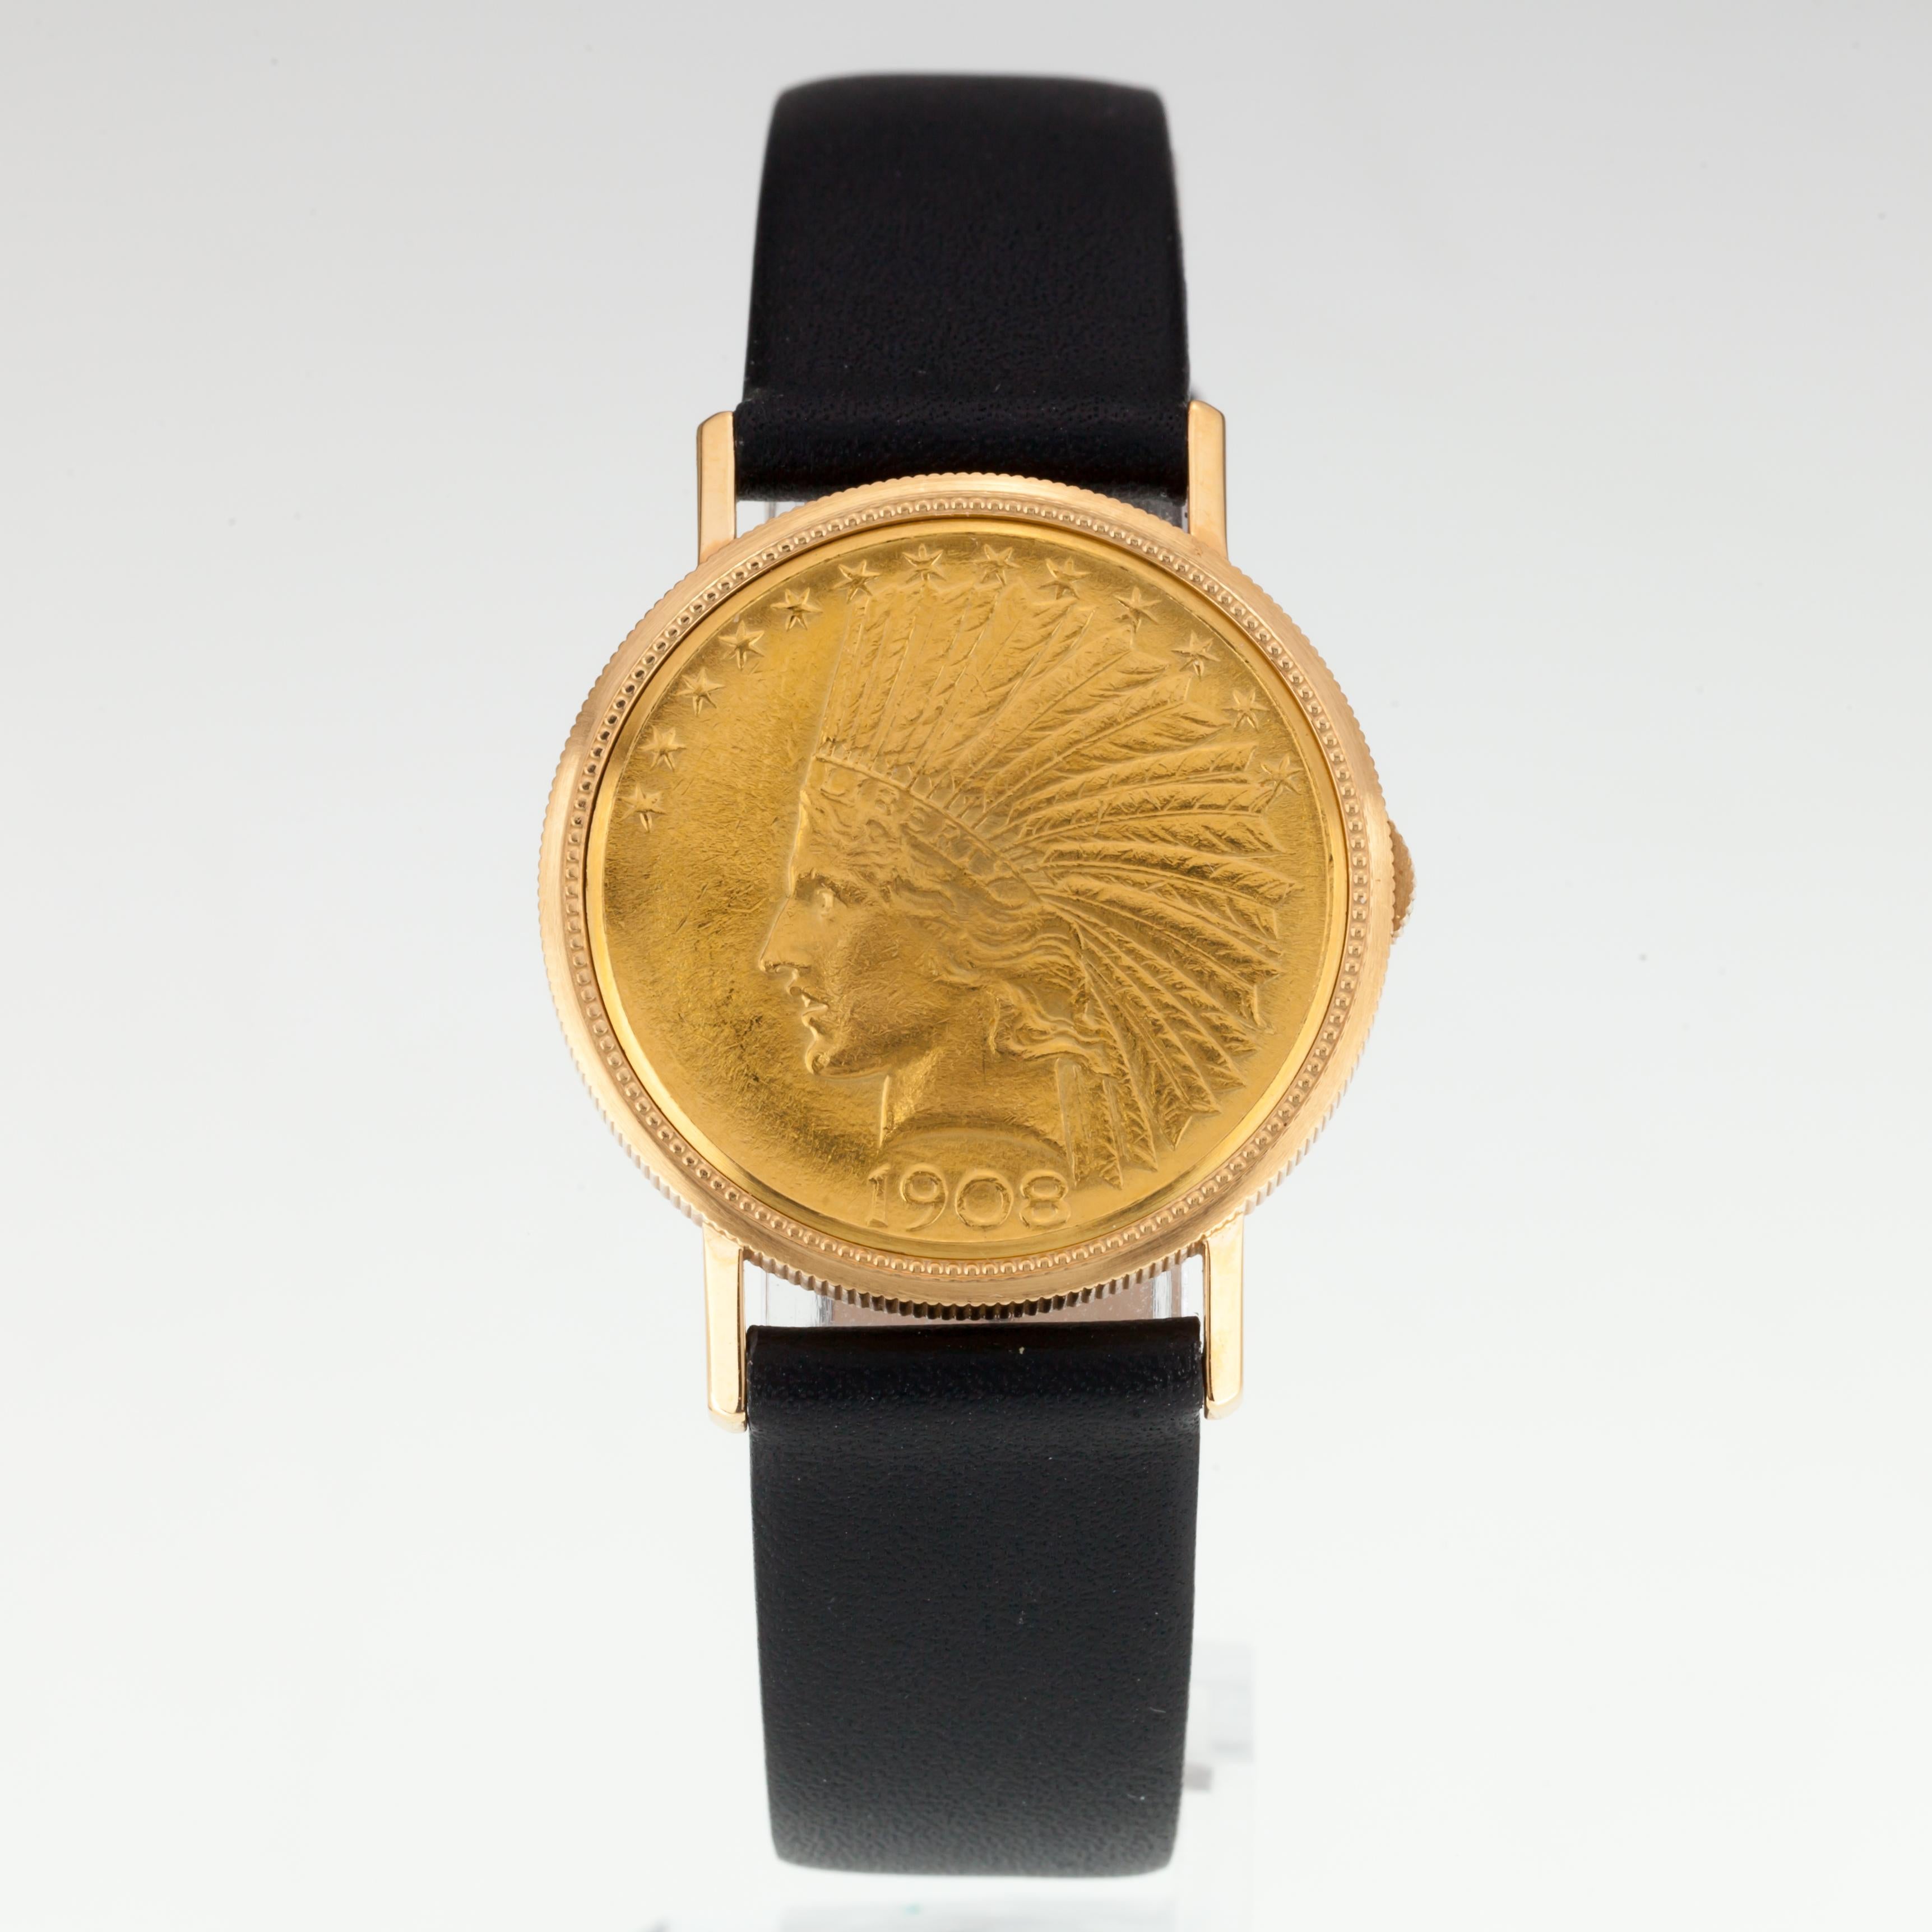 Women's or Men's Vintage Leuba Louis 18k $10 Gold Indian Watch with Leather Band, Eagle Reverse